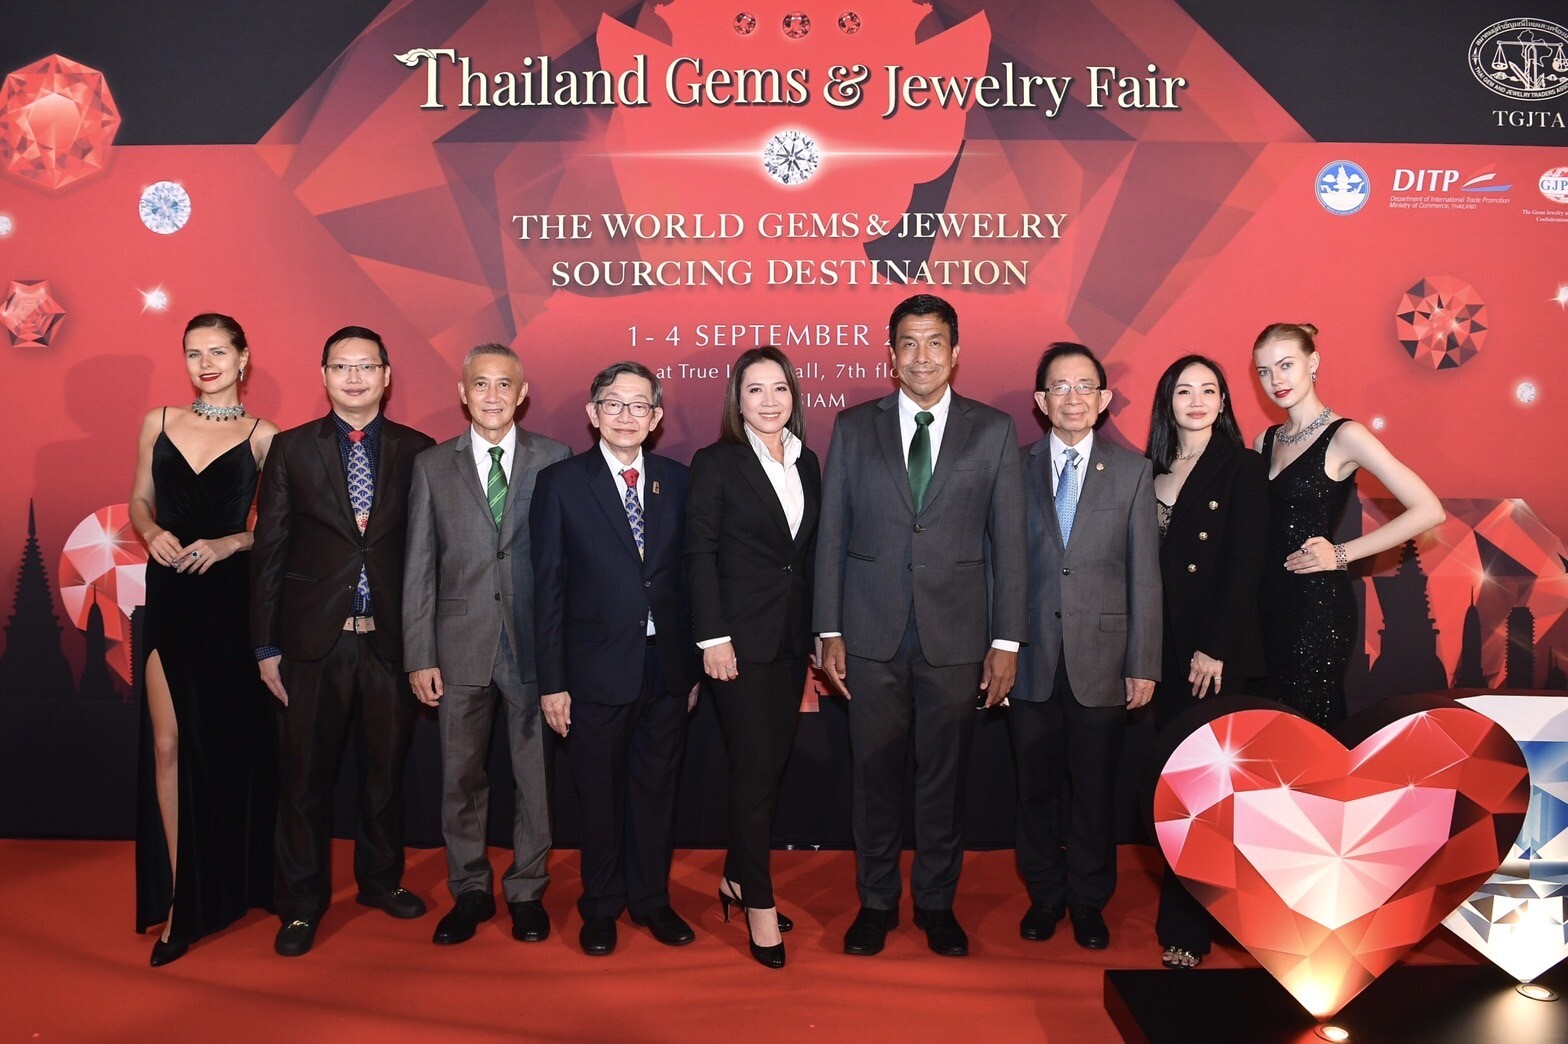 TGJTA Launches Thailand Gems &amp; Jewelry Fair 2022, Aiming to Push Thailand As Top Sourcing Destination Among Global Traders